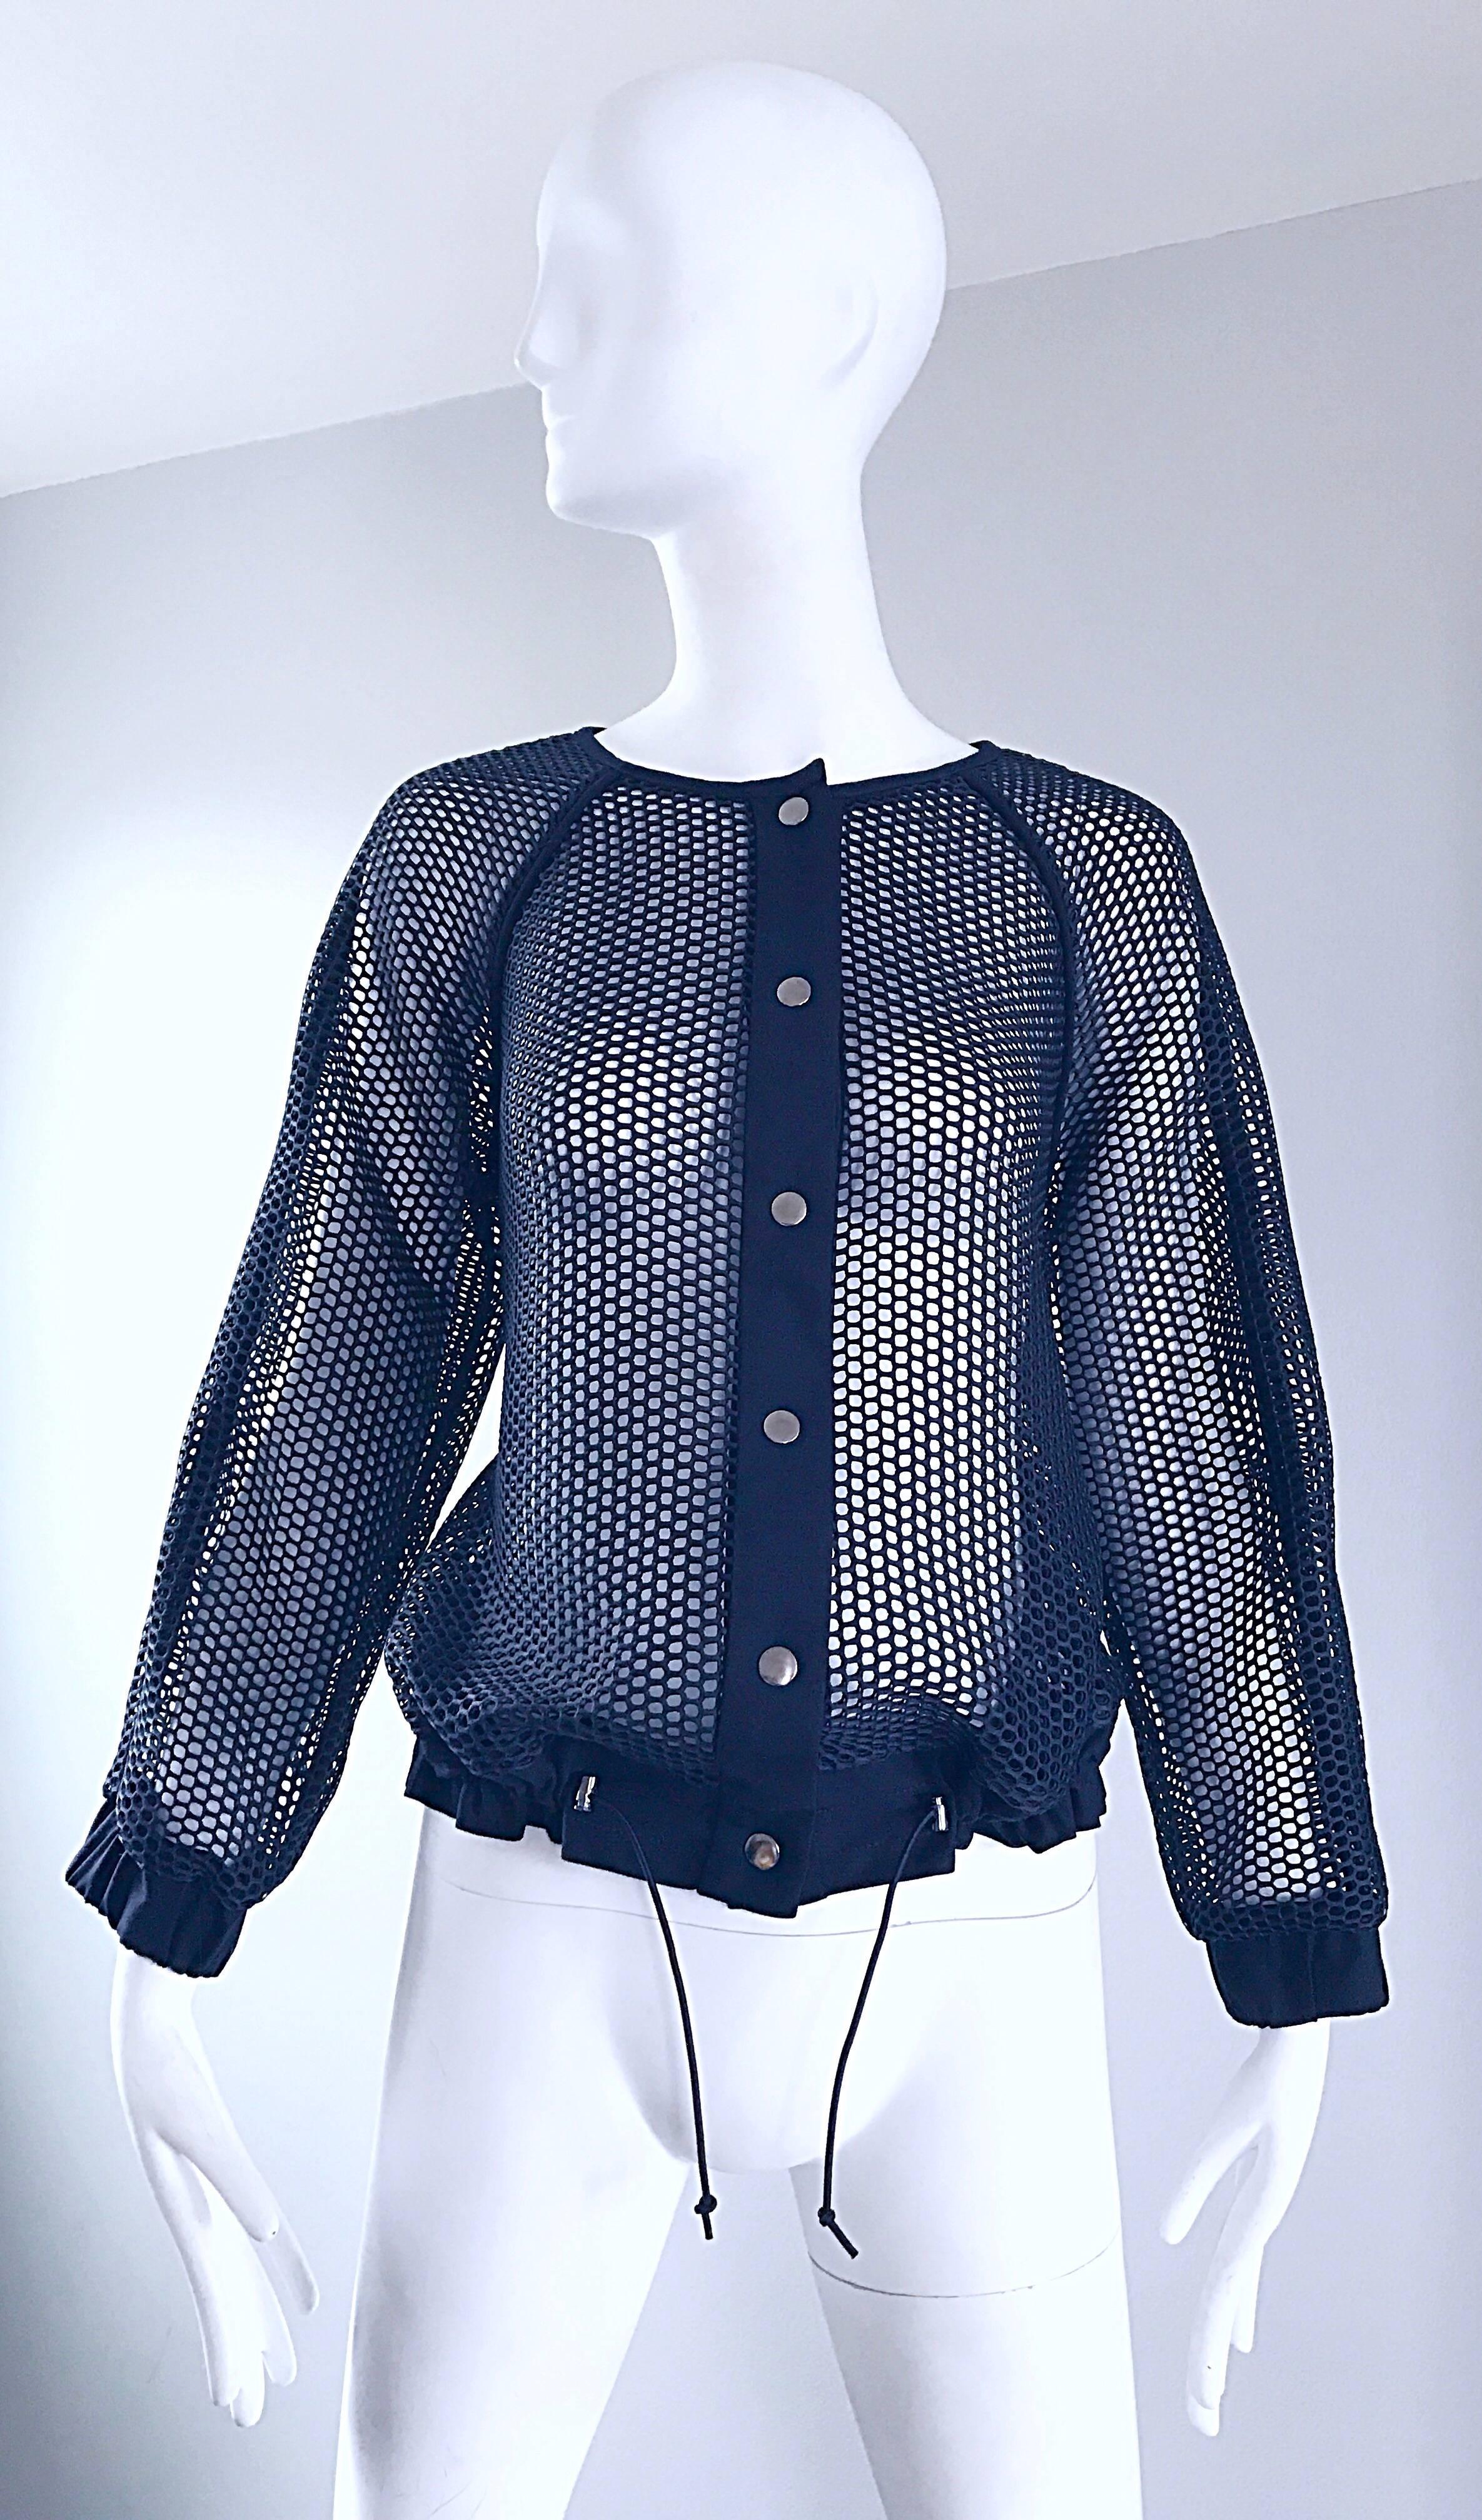 Brand new with original $795 price tag LAVER nautical jacket! Classic navy blue color. Chic cut-out net gives this jacket just the right amount of edge! Snaps up the front. Drawstring waistband can adjust to fit, and will work for an array of sizes.